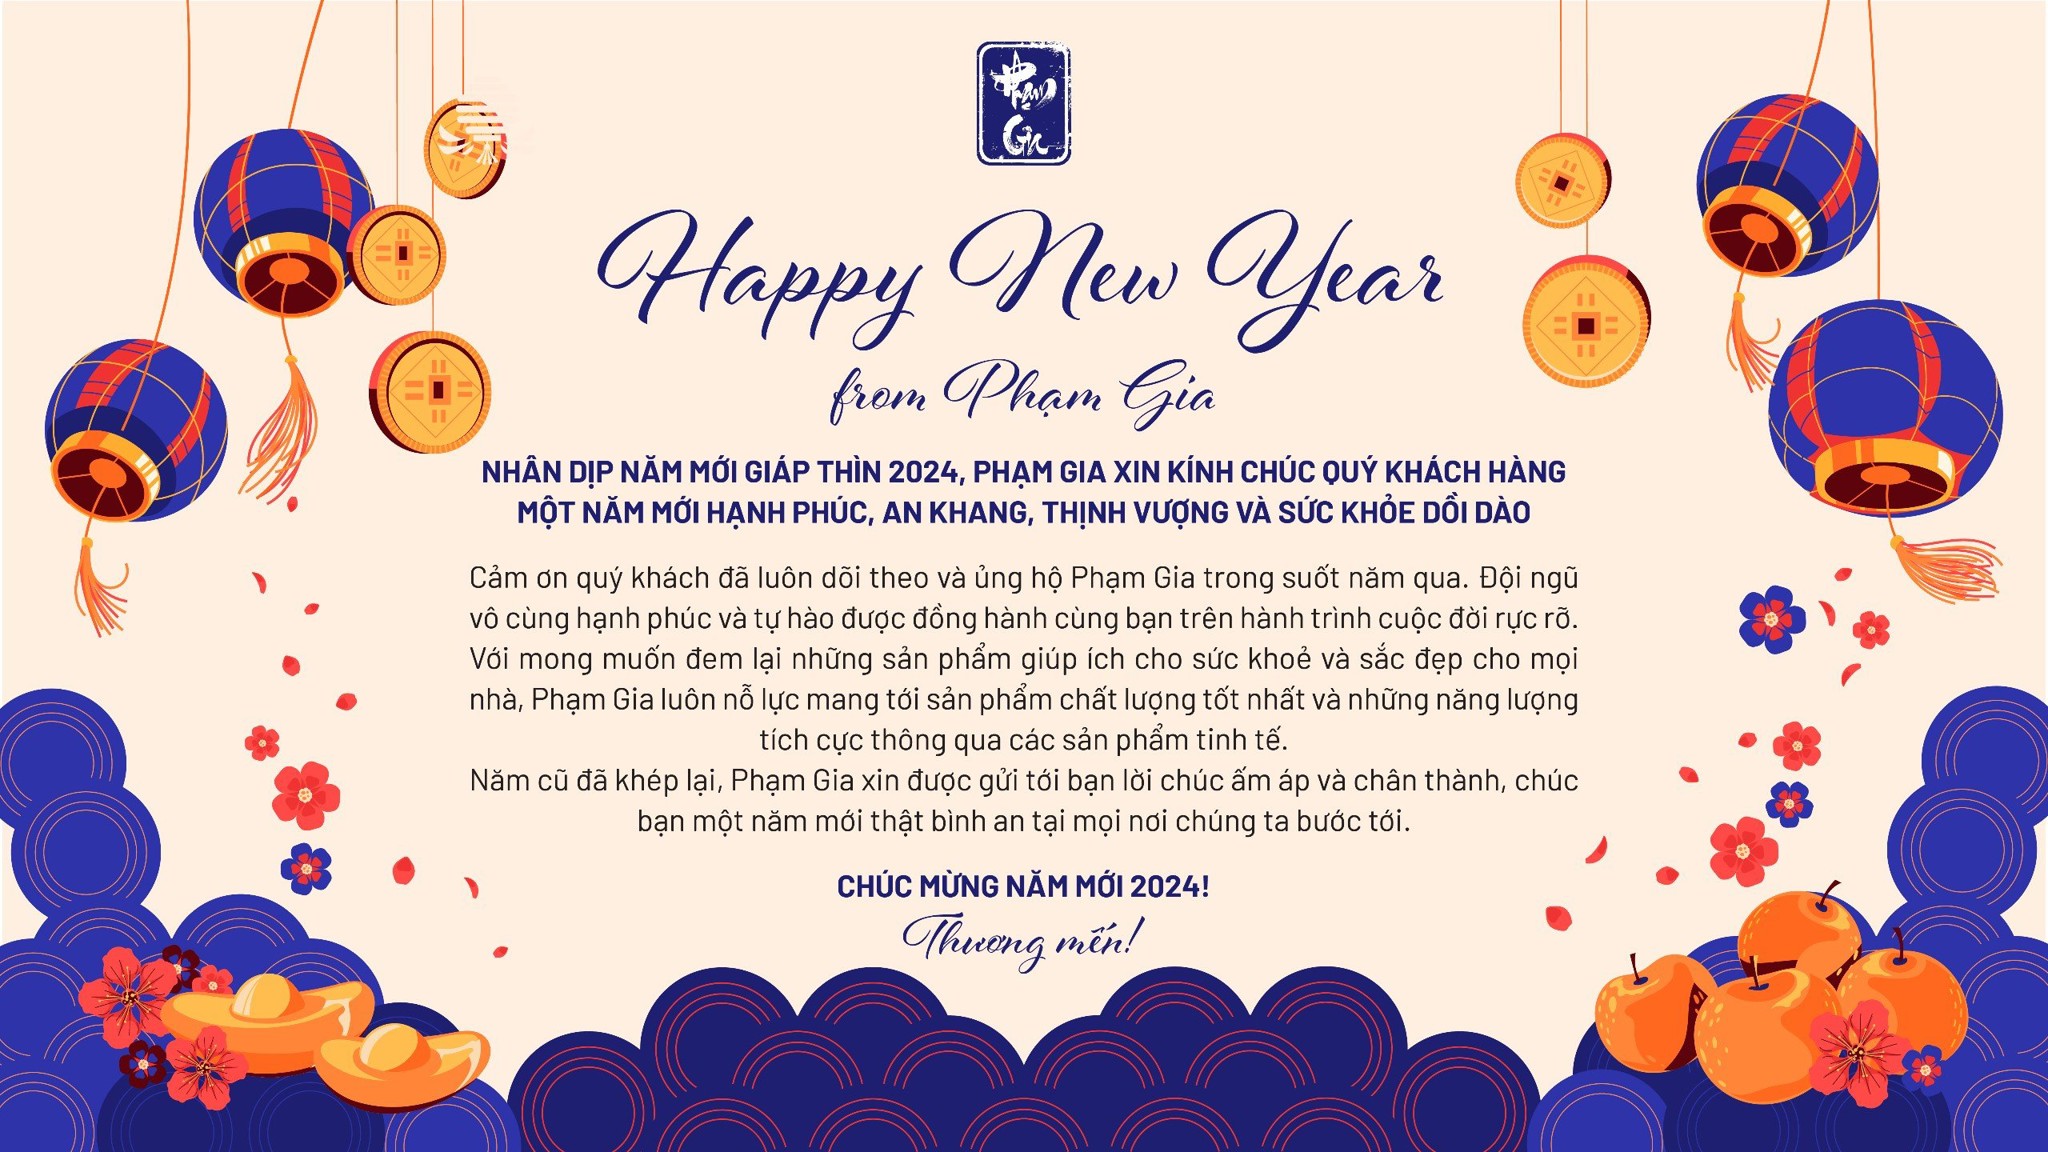 🎉Happy New Year 2024 from Phạm Gia🎉